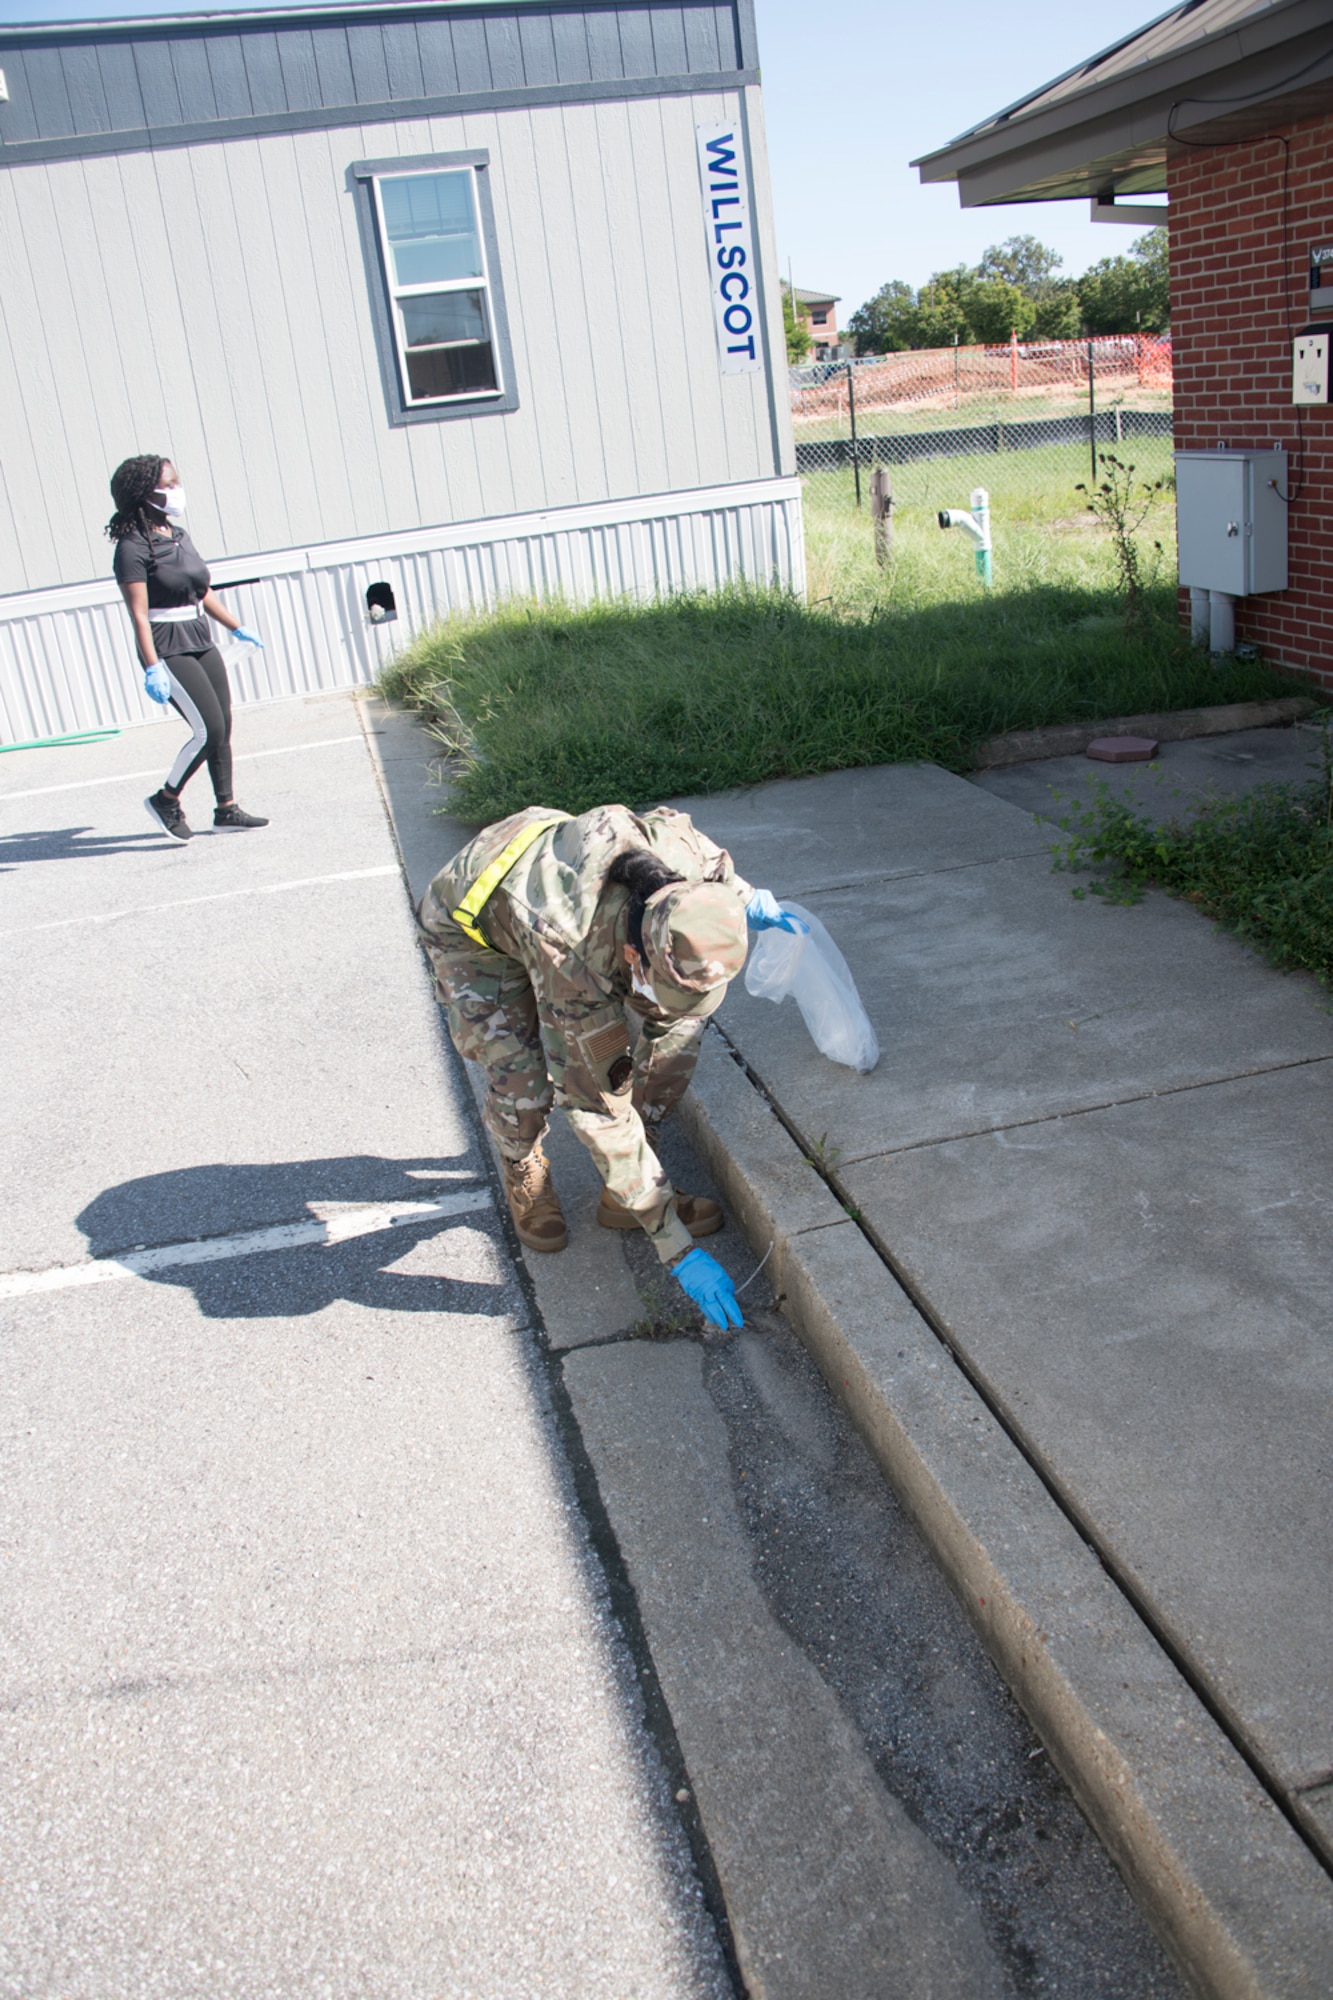 Several 459th ARW Liberators hit the pavement and the grassy areas of the unit today to participate in the wing's Fall clean up for a few hours Sep. 2, 2021. The members were provided trash bags, and reflective belts and gloves for safety. (U.S. Air Force photo by Maj. Tim Smith)